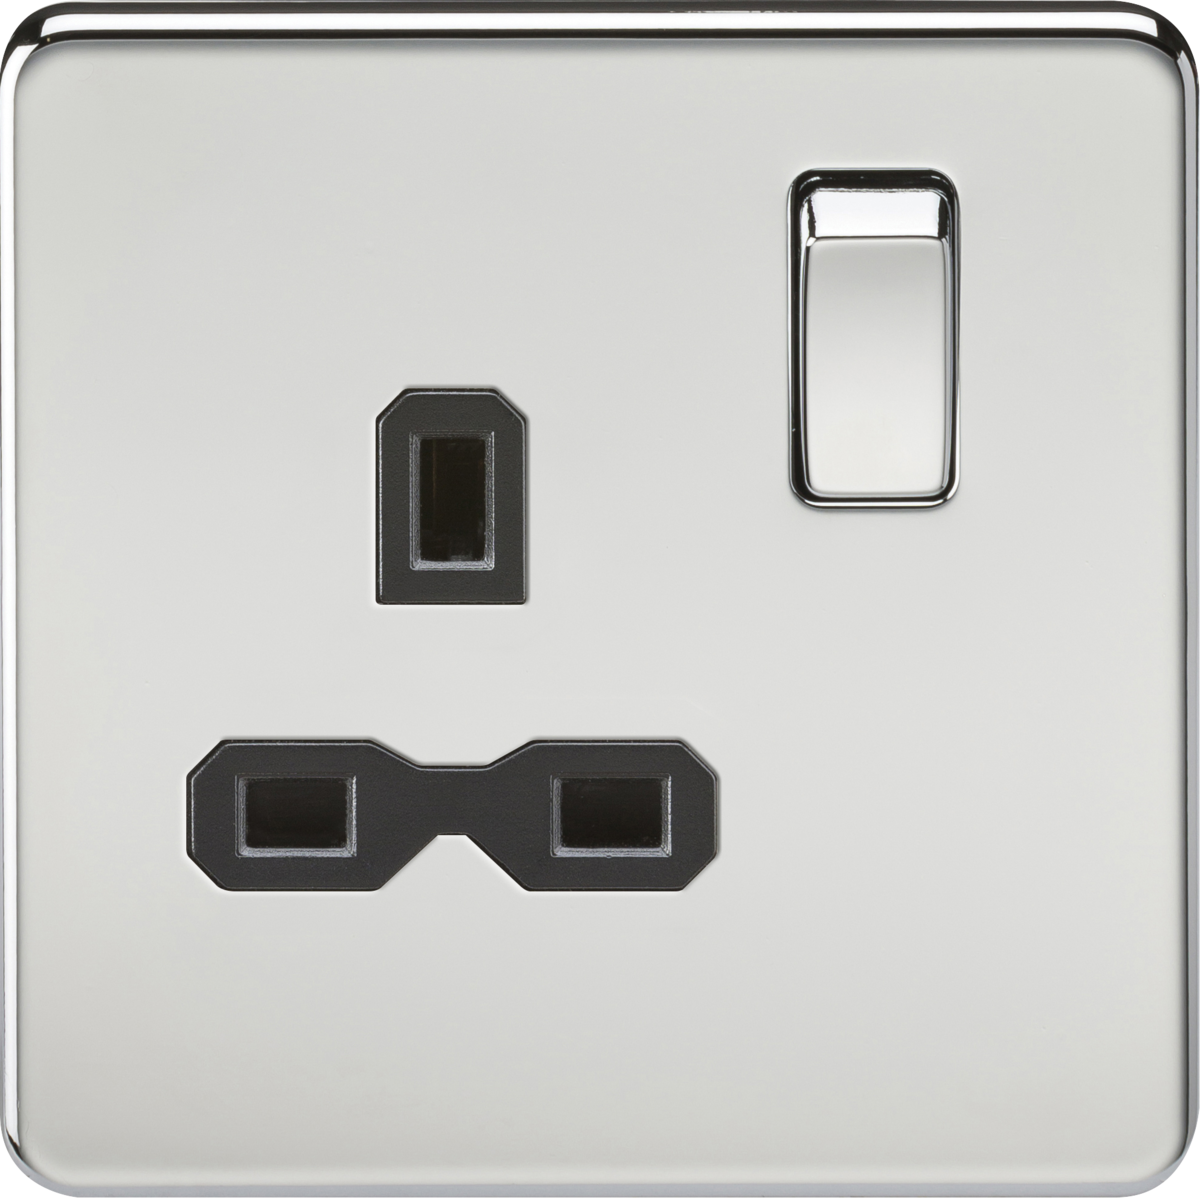 Screwless 13A 1G DP switched socket - polished chrome with black insert